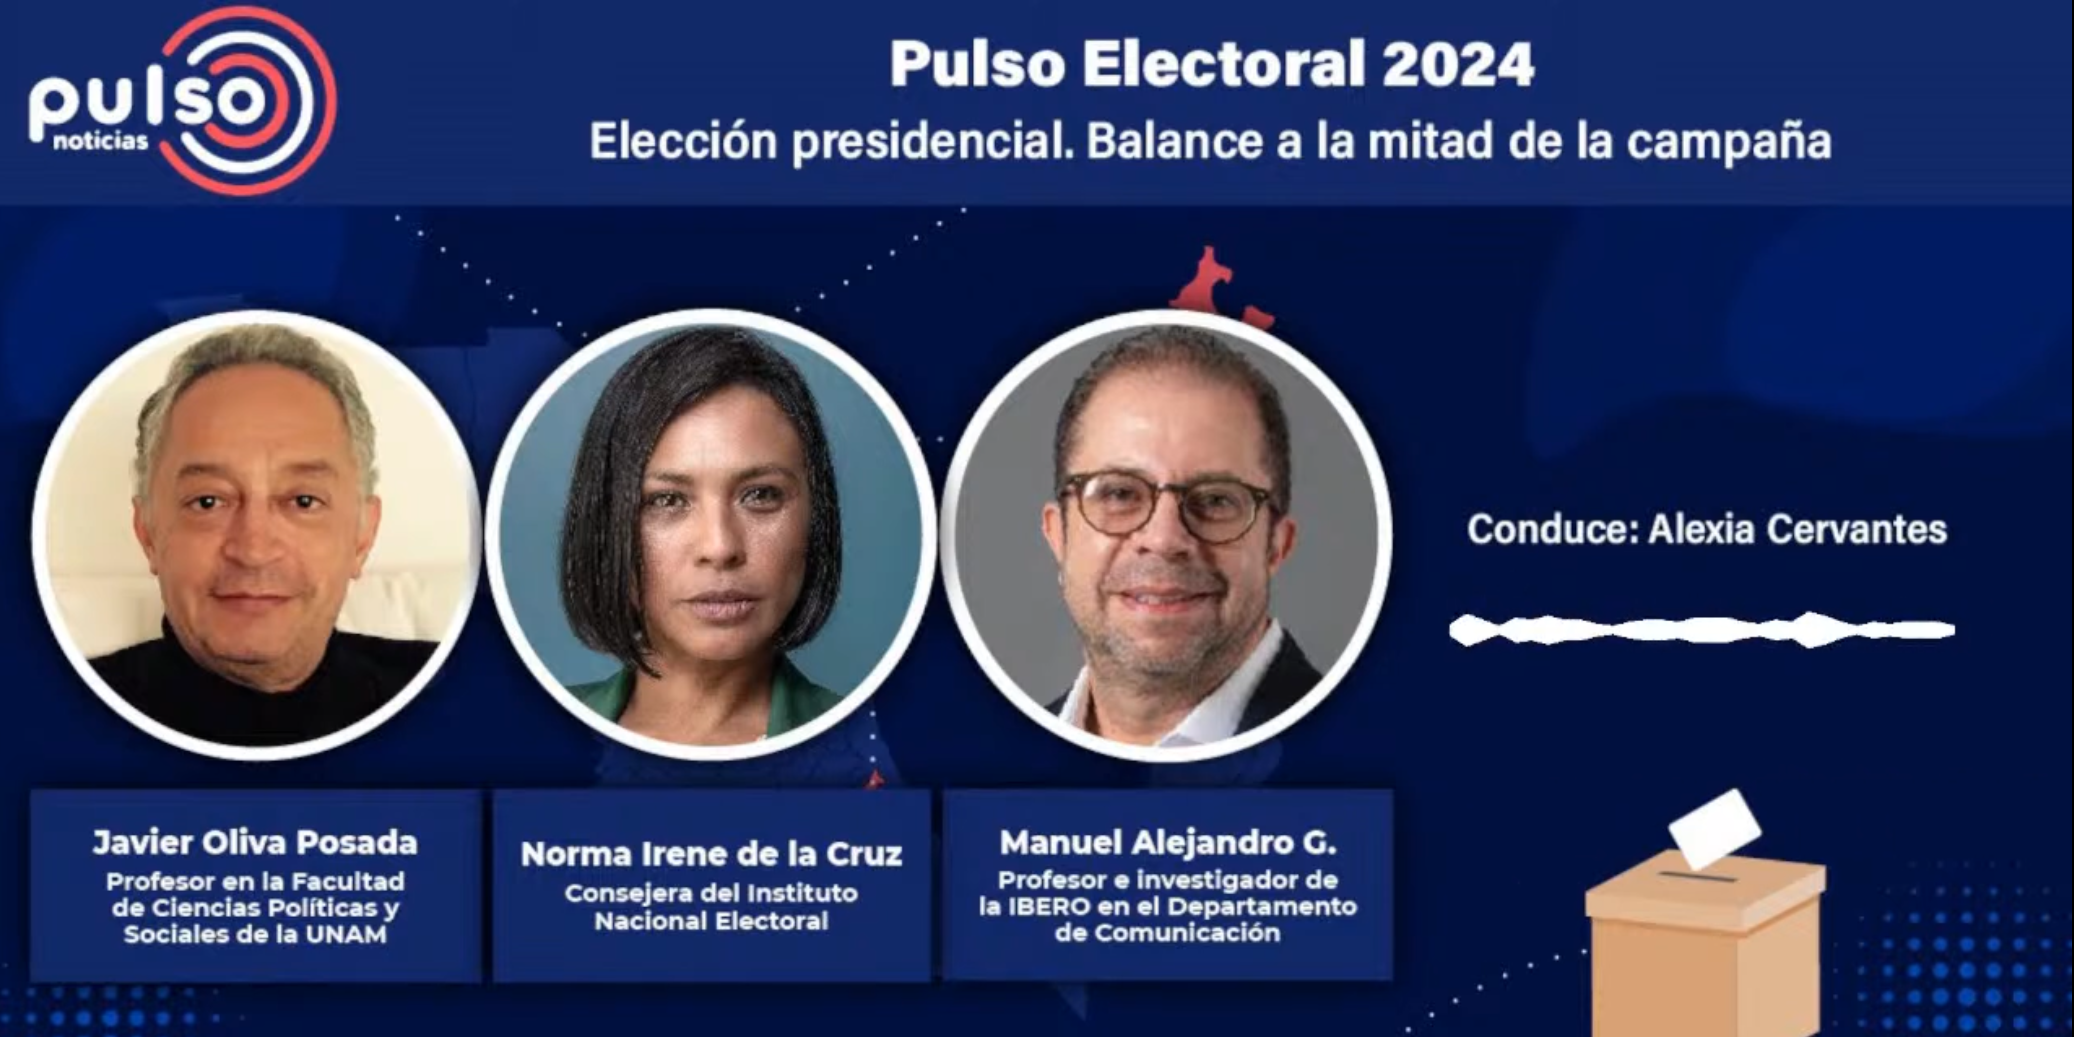 Pulso Electoral 2024: Presidential Election. Mid-Campaign Review